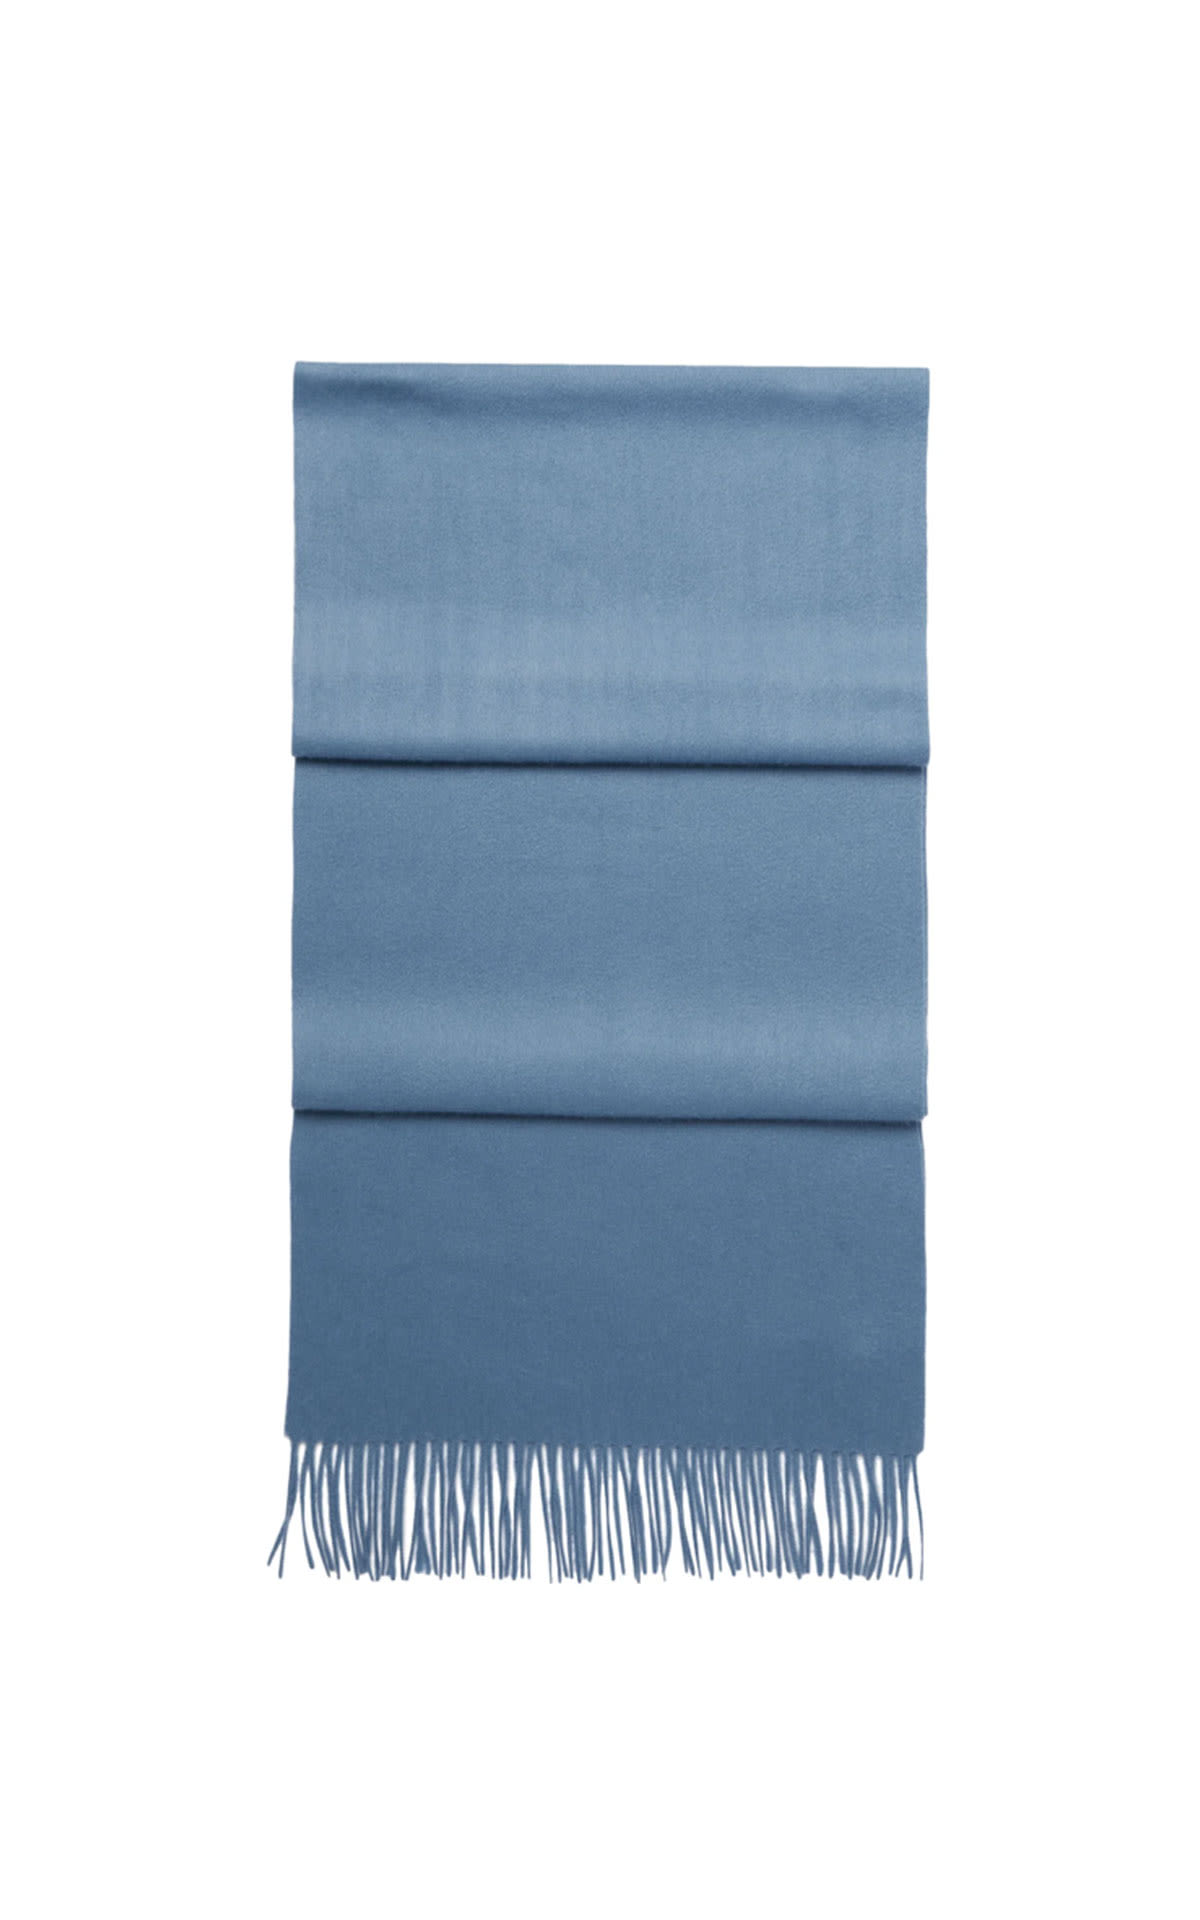 N.Peal Large woven cashmere scarf alpine blue from Bicester Village